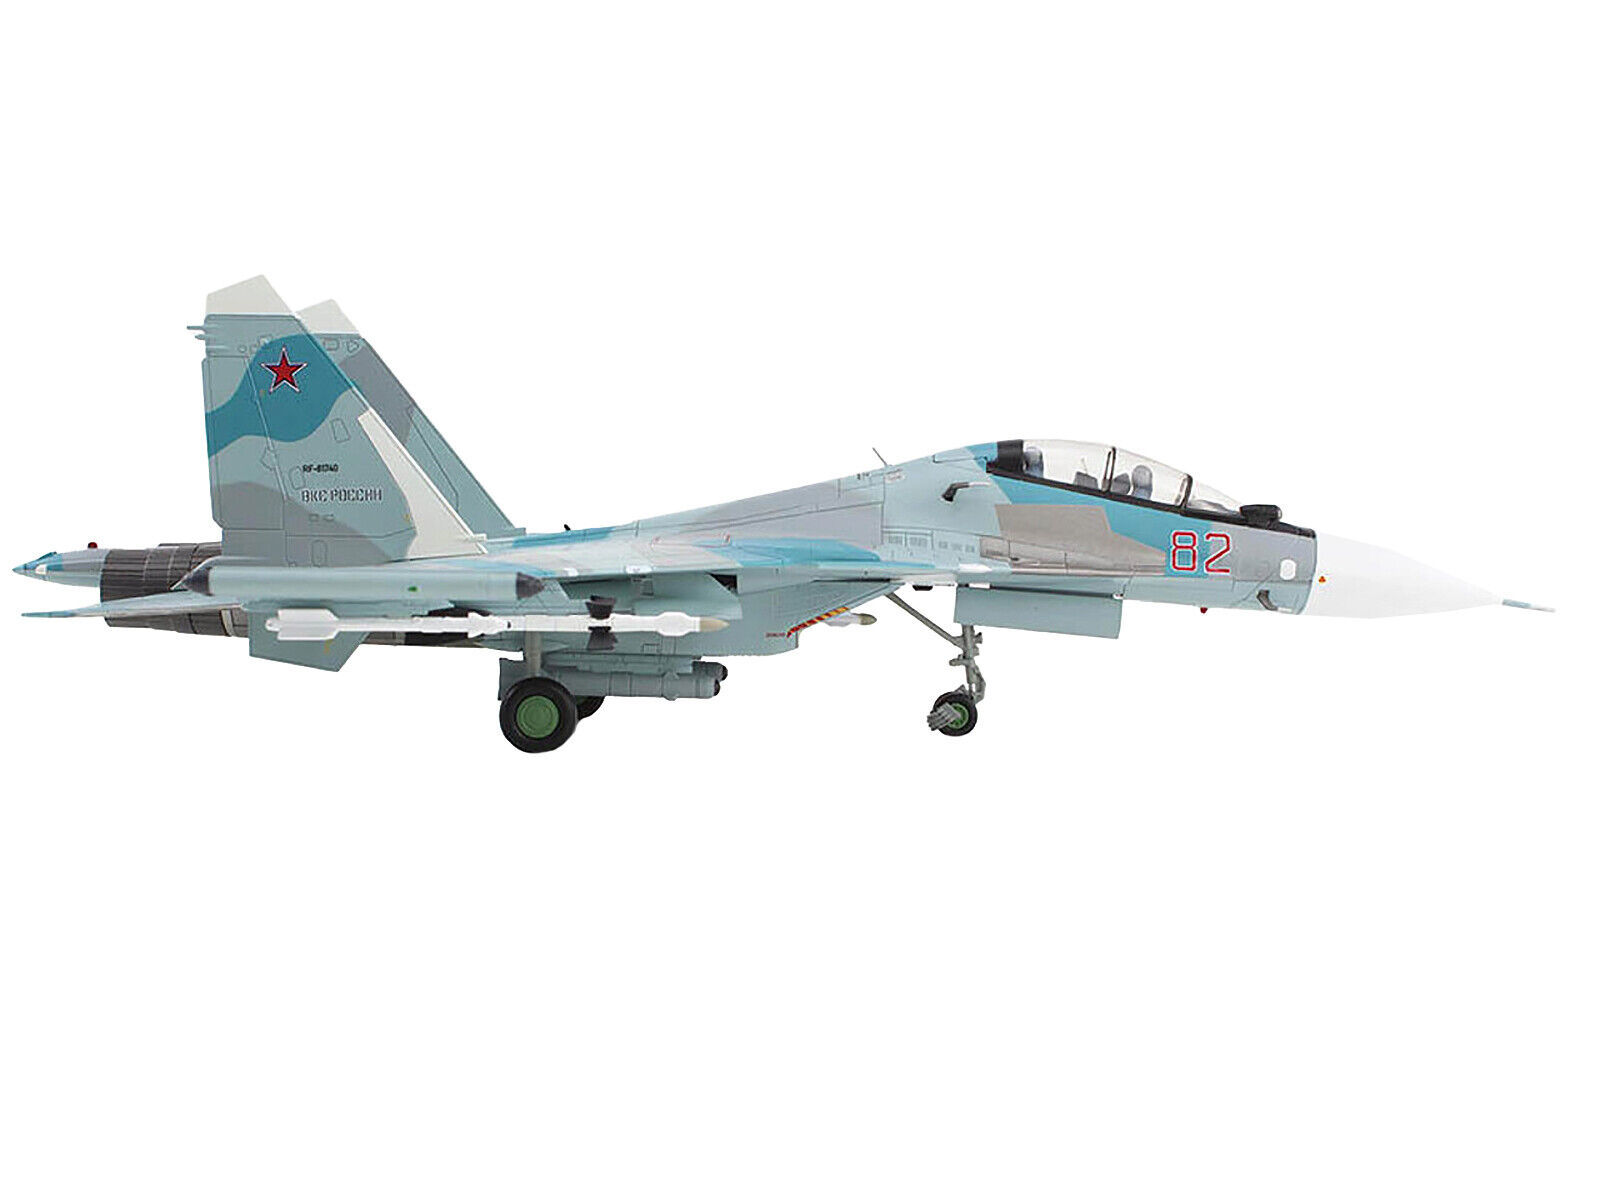 Sukhoi Su-30SM Flanker-C Fighter Aircraft Kubinka AB Russia 2018 Russian Air For - $159.19